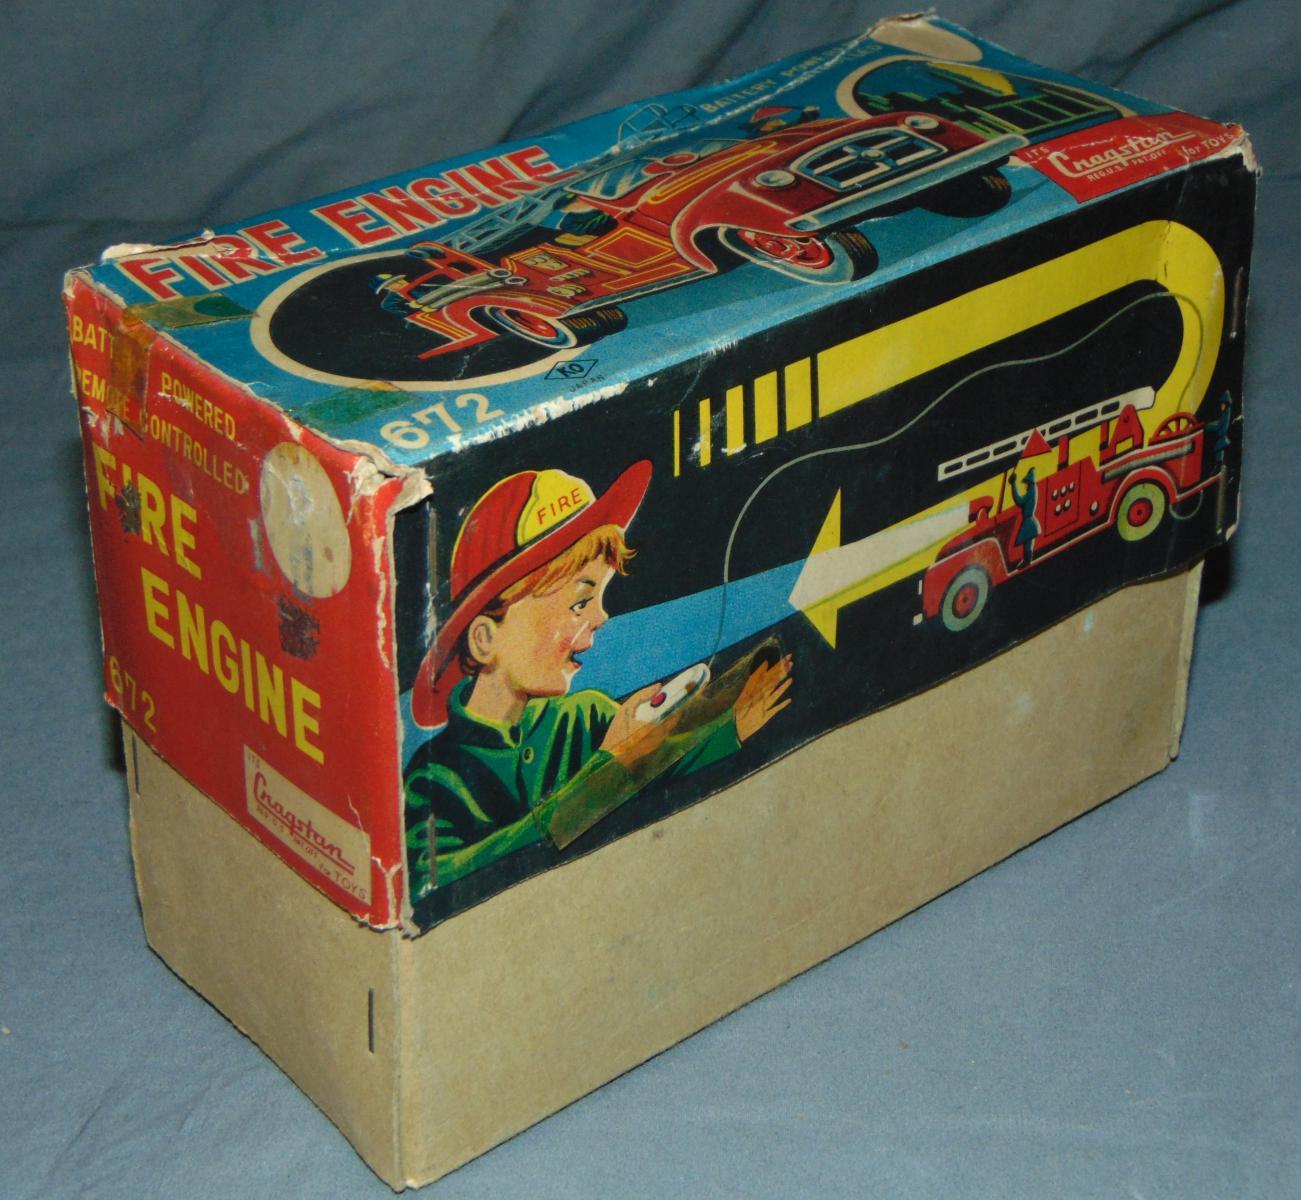 Boxed Battery Operated Cragstan Fire Engine